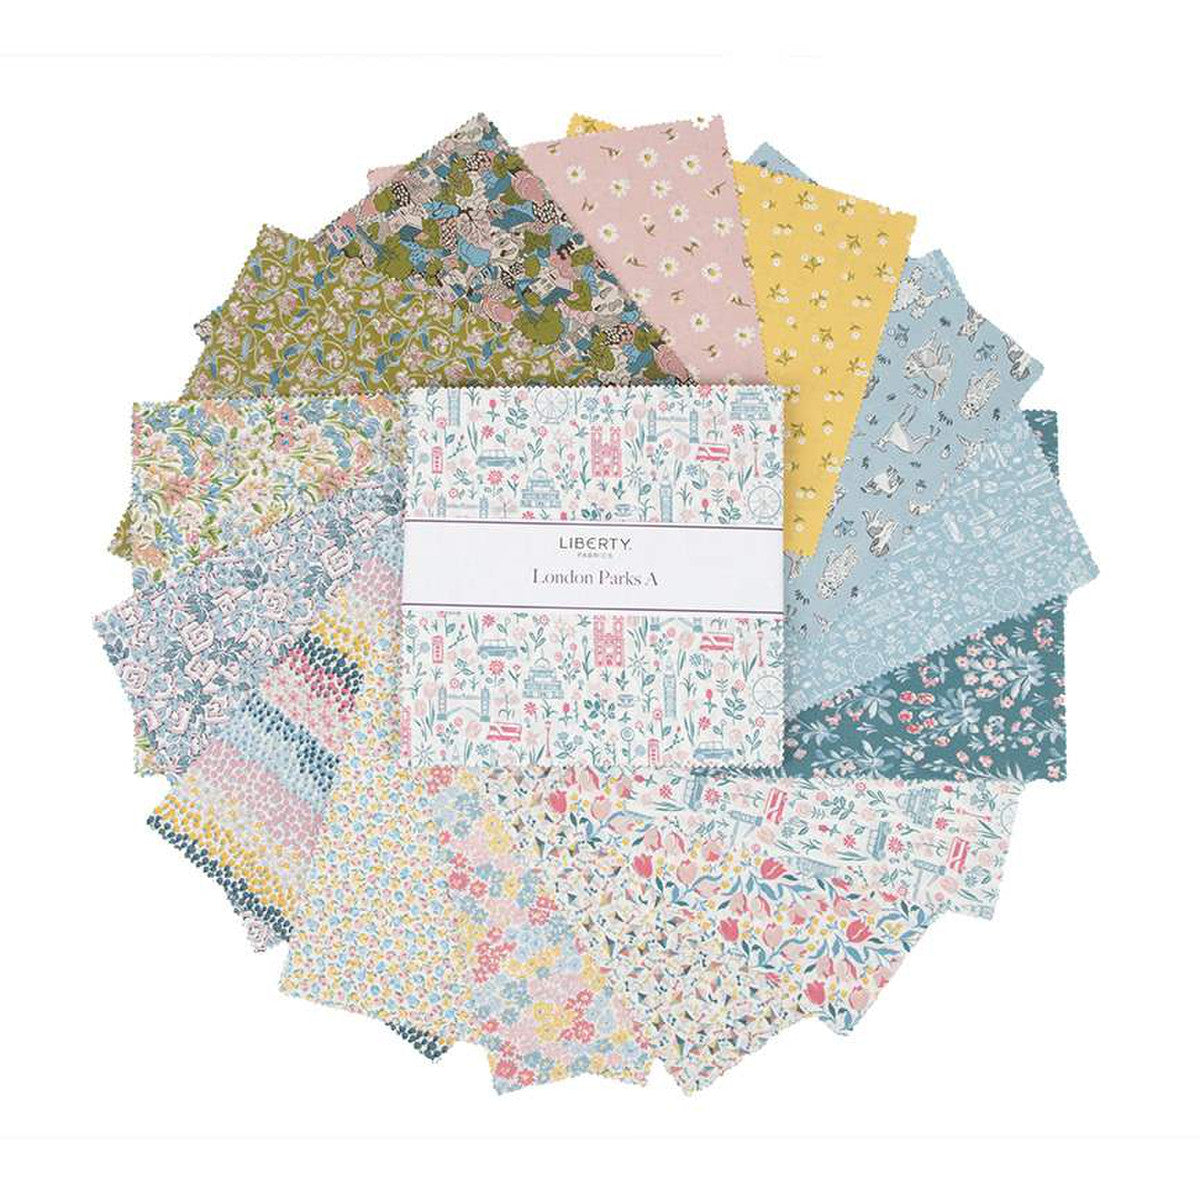 Liberty London Parks Quilt Fabric - 10 Inch Stacker in A Pinks and Blues - set of 42 10" squares -  10-LLONDONPARKSA-42